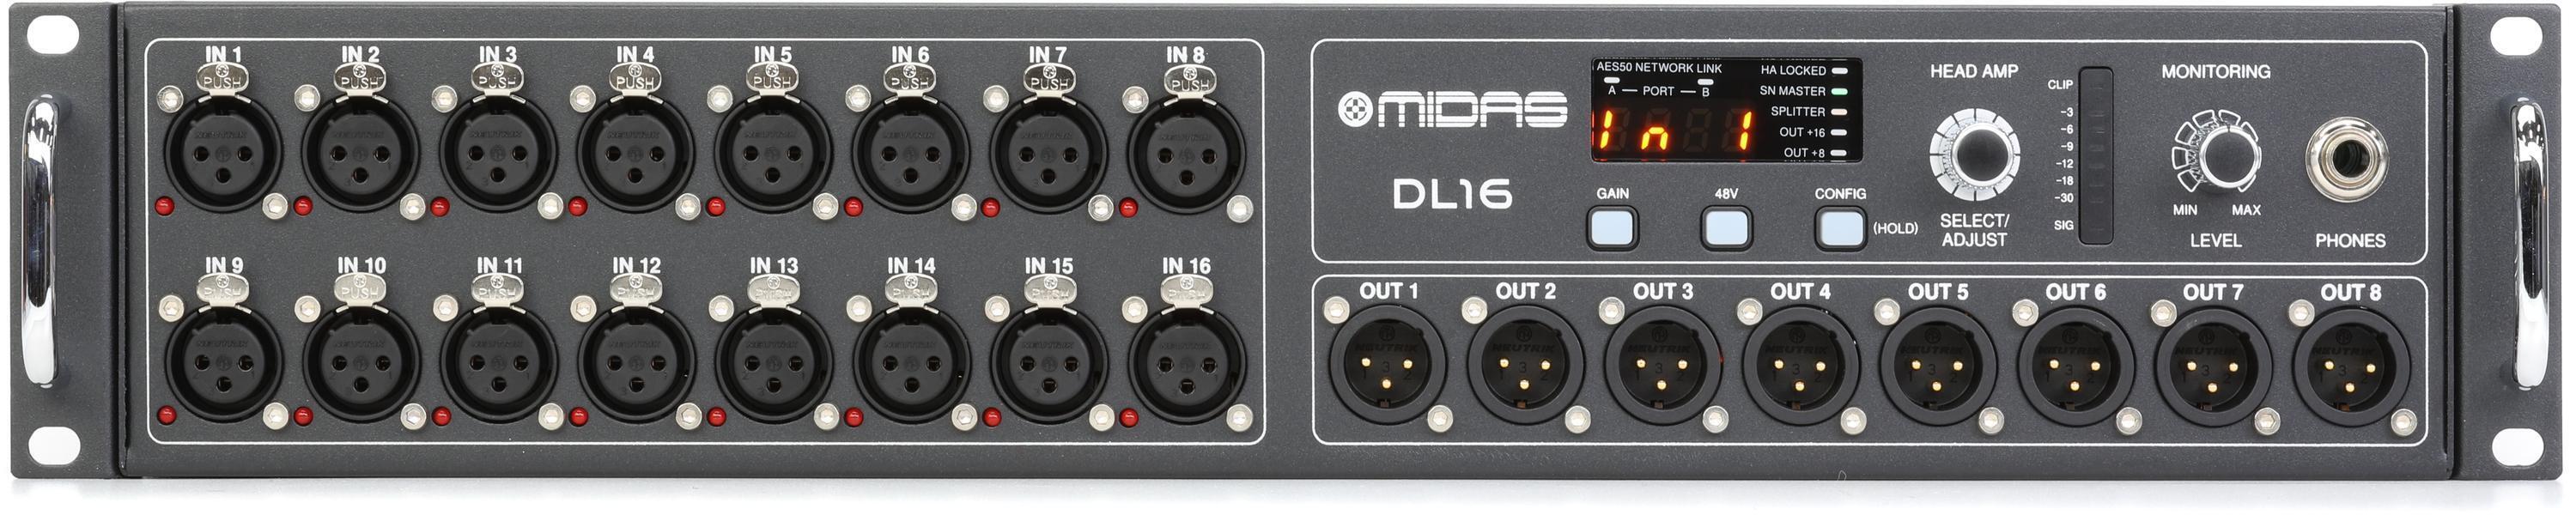 Midas DL16 16-input / 8-output Stage Box | Sweetwater